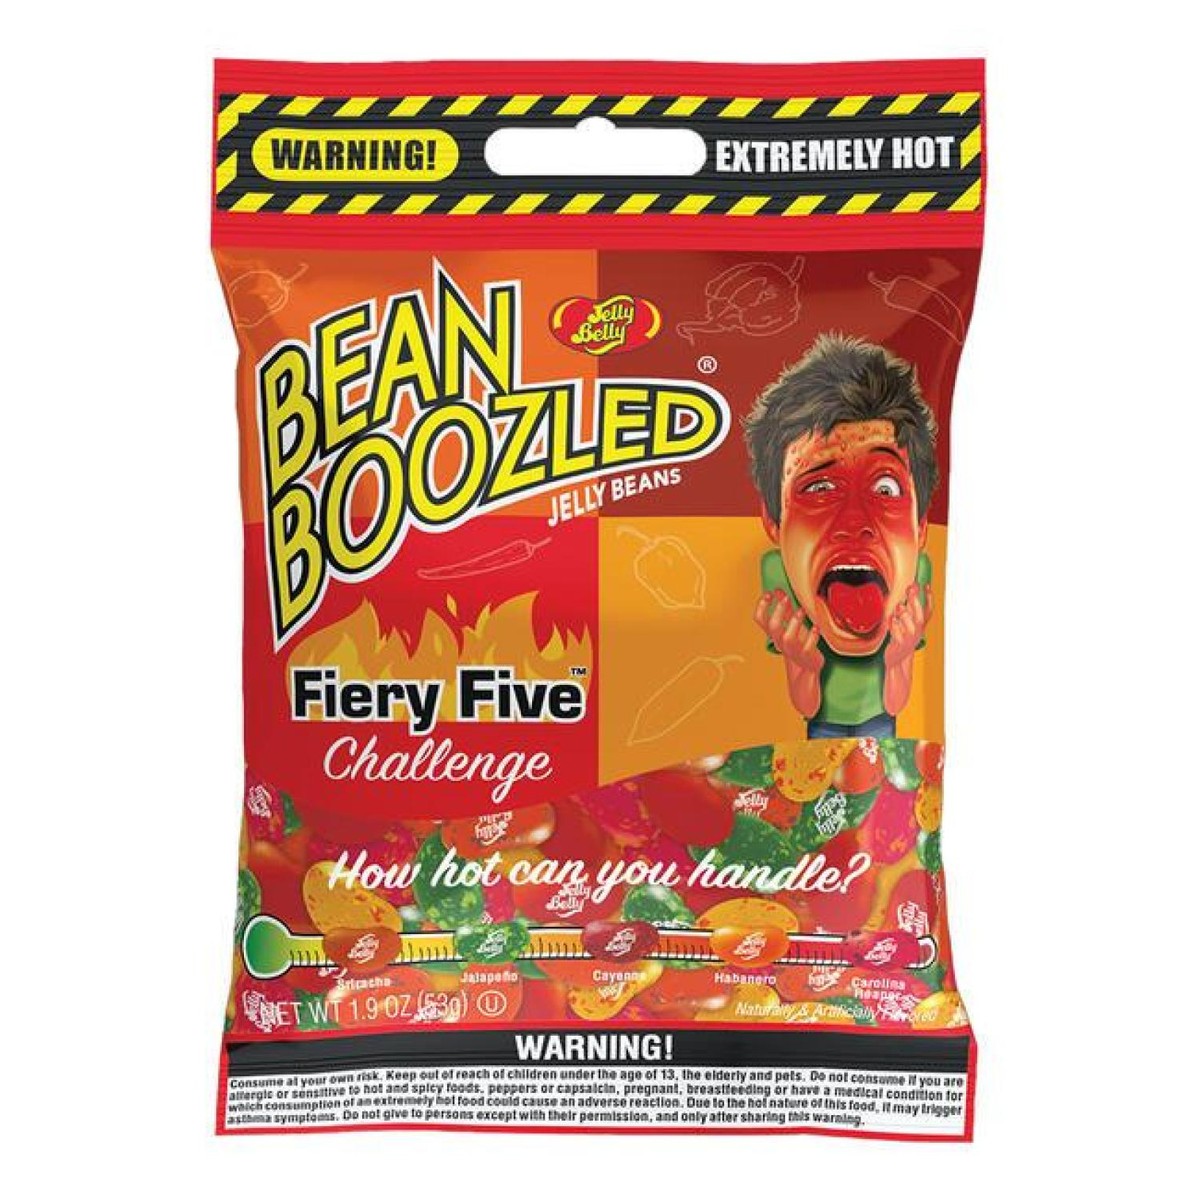 Jelly Belly Harry Potter Bertie Botts Jelly Beans, 1.2 oz (12 Pack) - Whole  And Natural